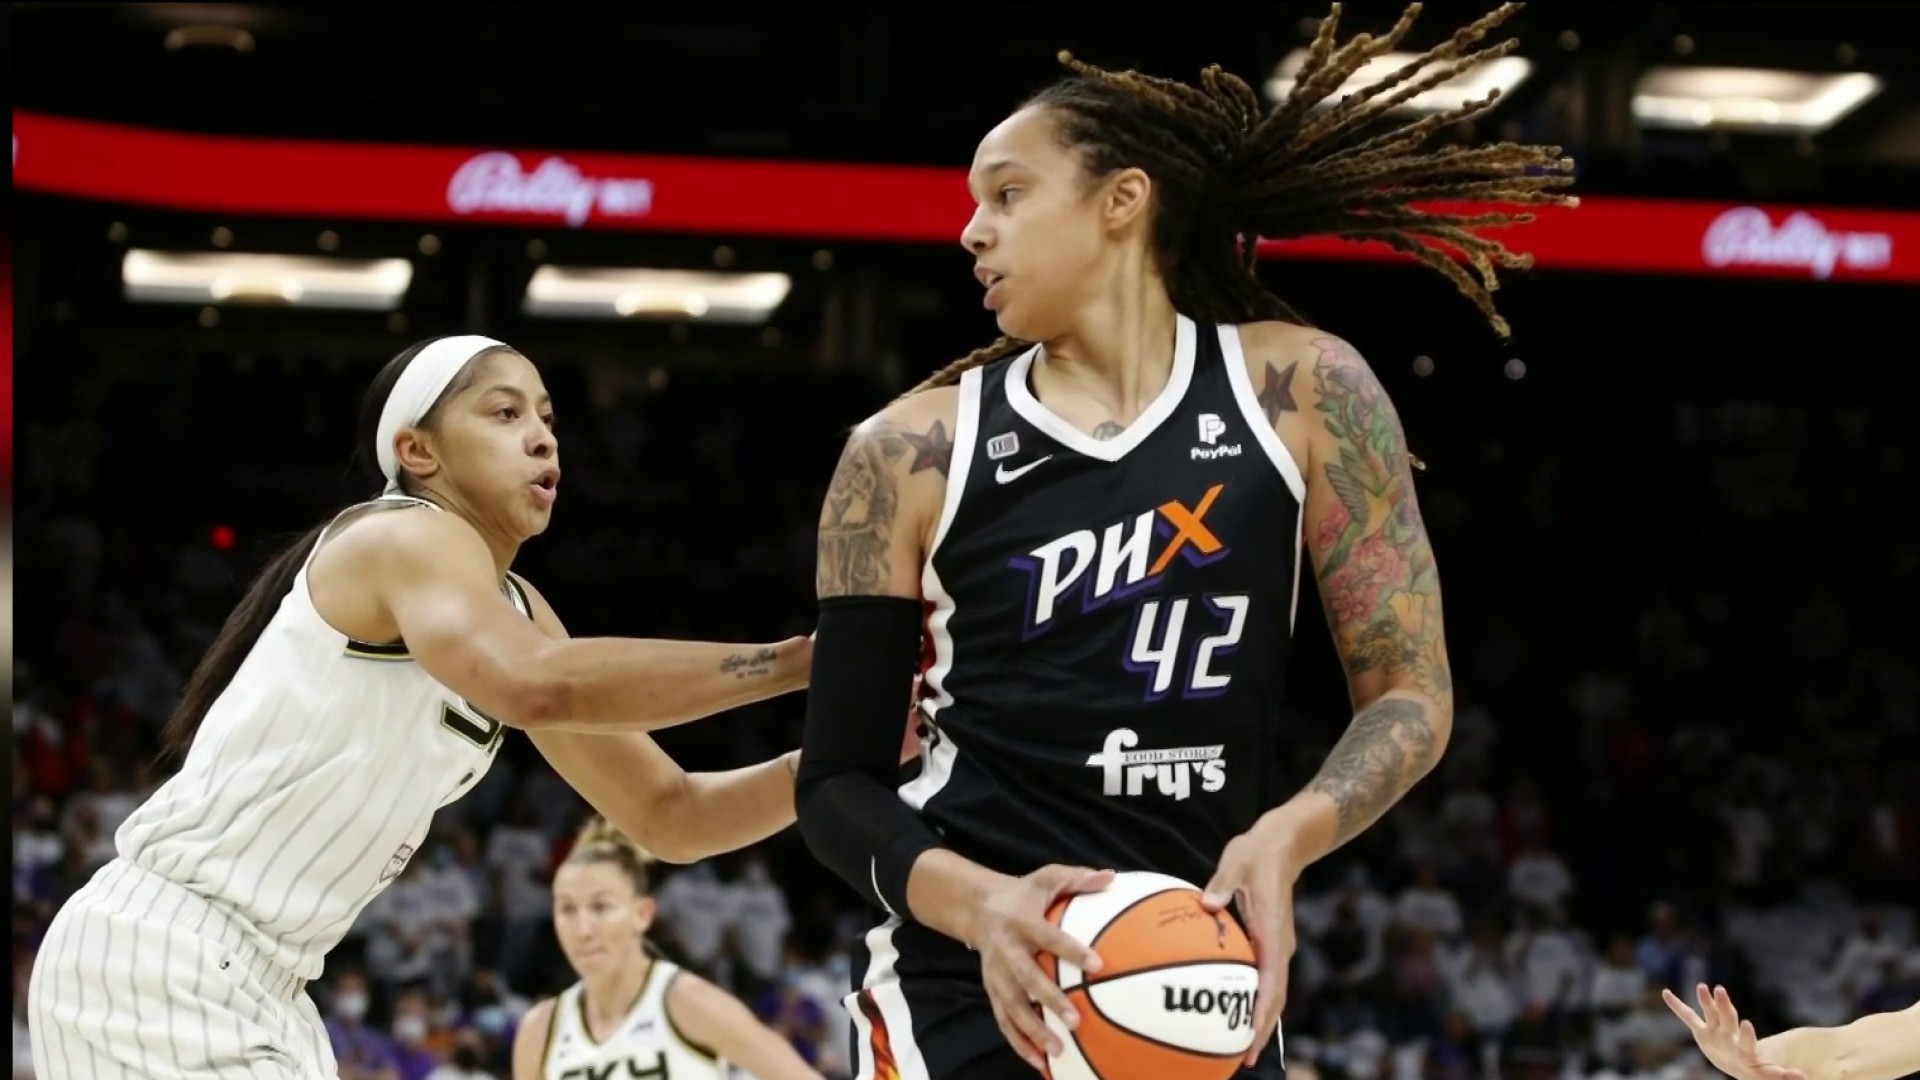 Brittney Griner S Wife Posts On Instagram About Wnba Star S Detainment In Russia